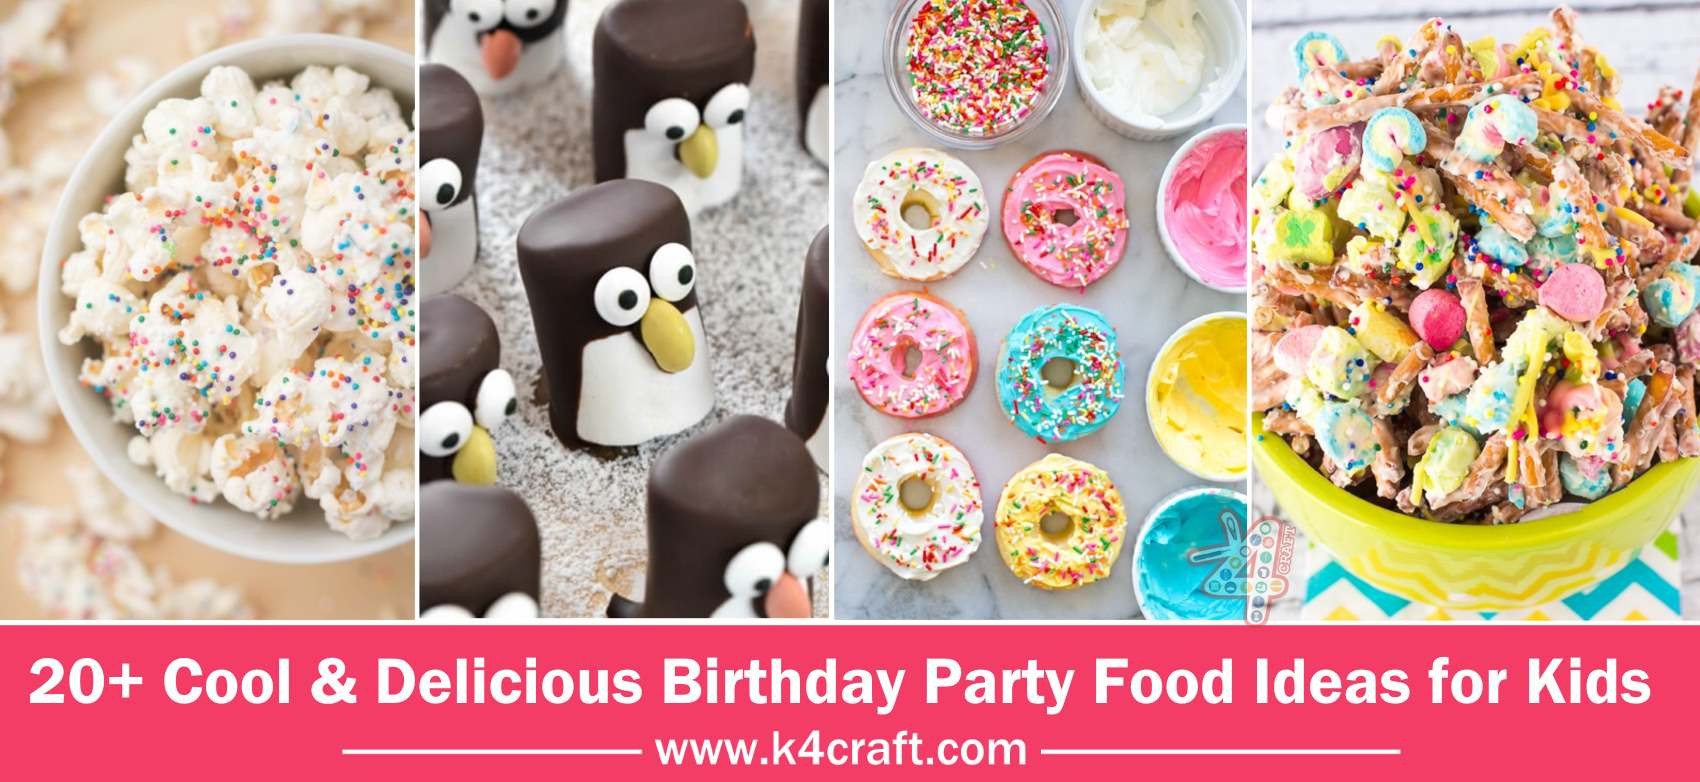 Cool Party Food Ideas
 Cool & Delicious Birthday Party Food Ideas for Kids K4 Craft